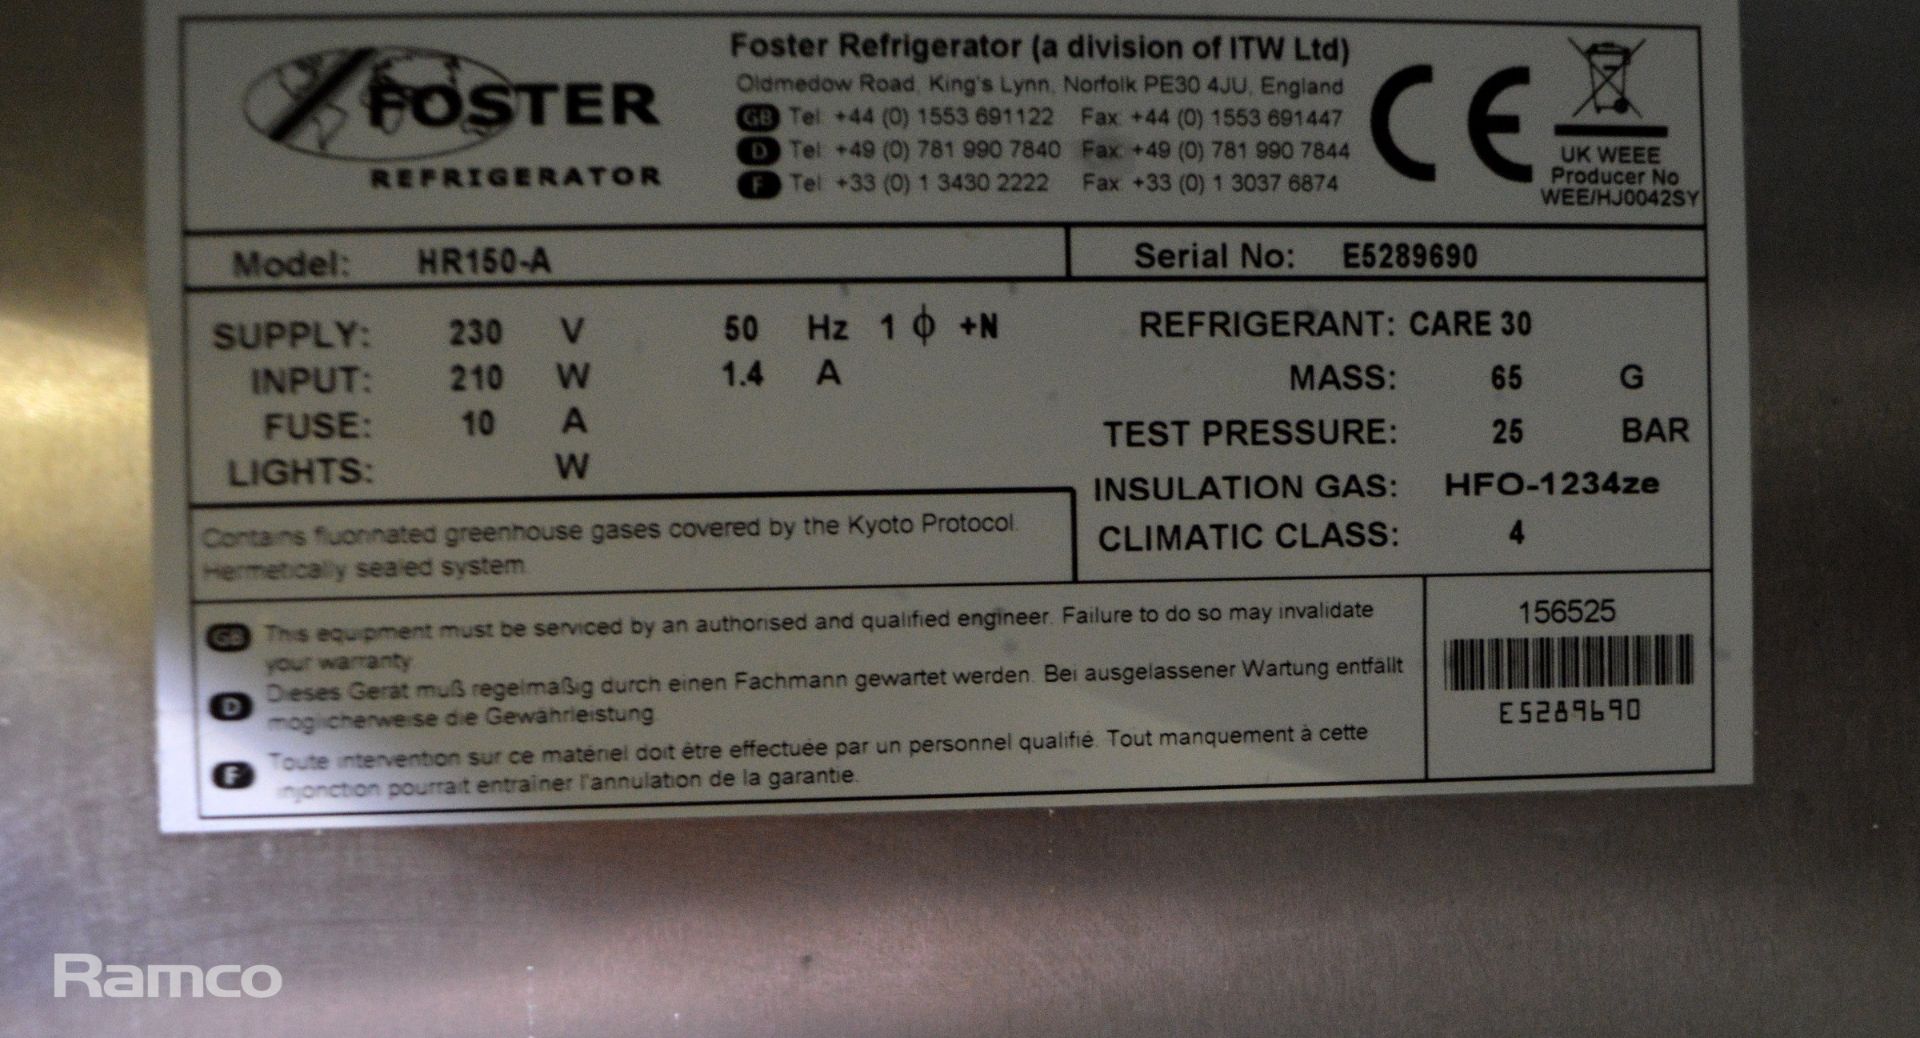 Foster HR150-A Stainless Stainless Fridge Unit - L600 x W640 x H820mm - Image 4 of 4